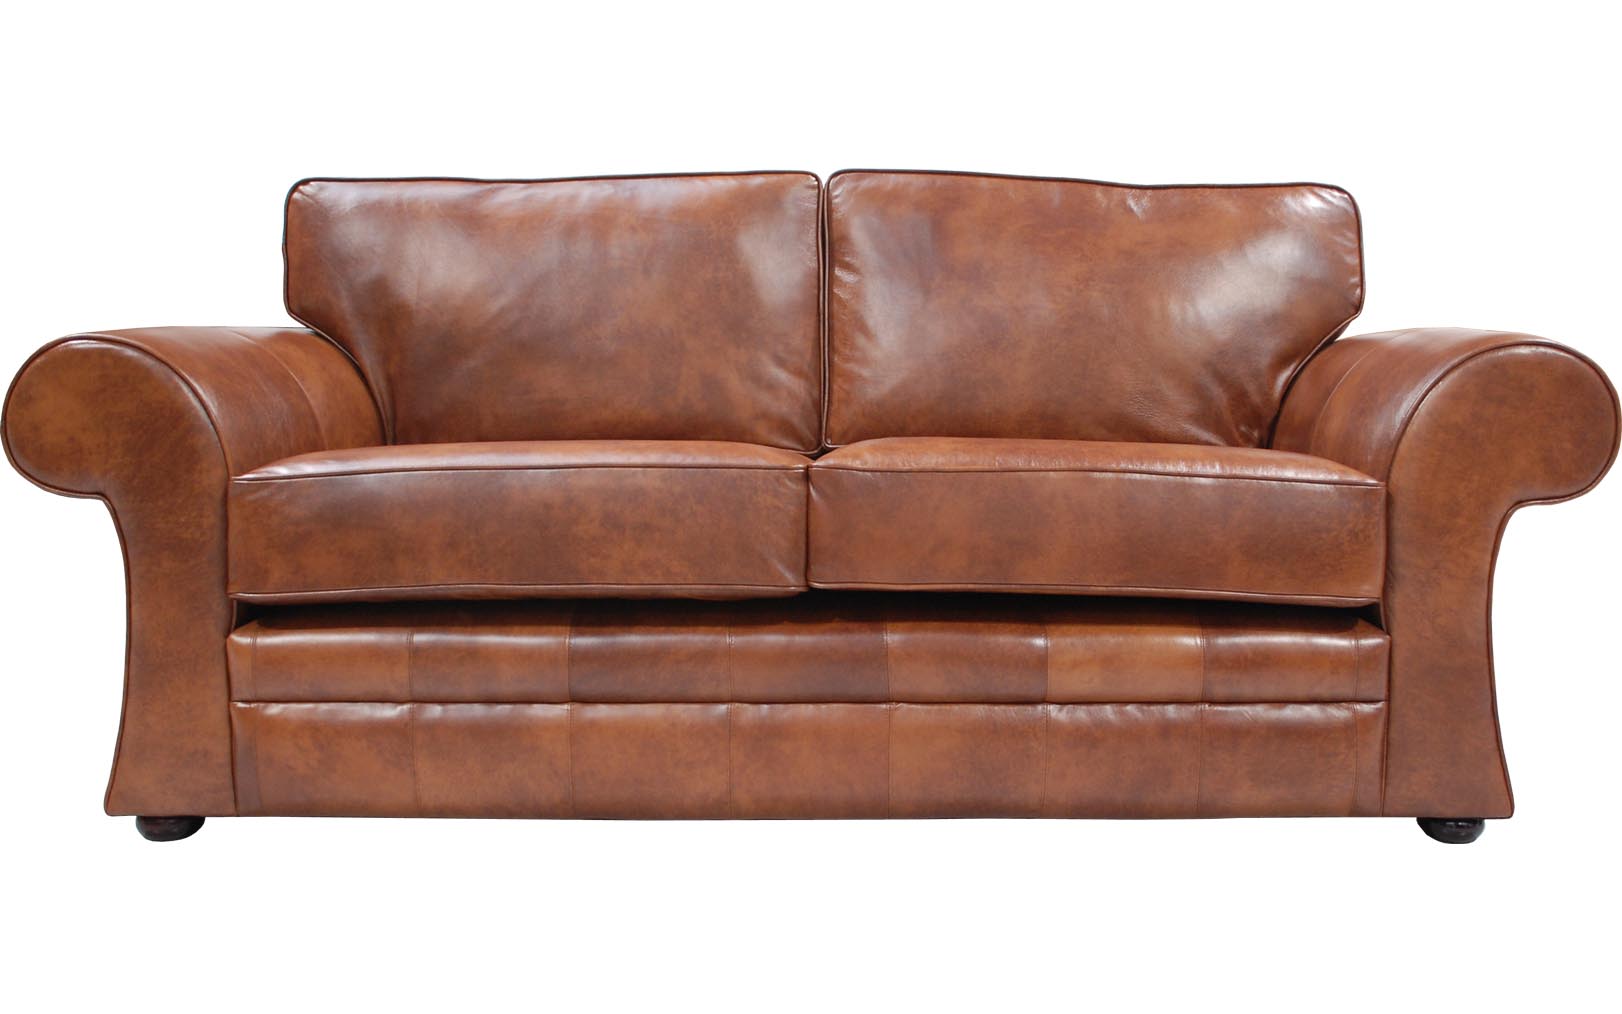 Cavan Real Leather Sofa Bed Uk, Brown Leather Bed Sofa